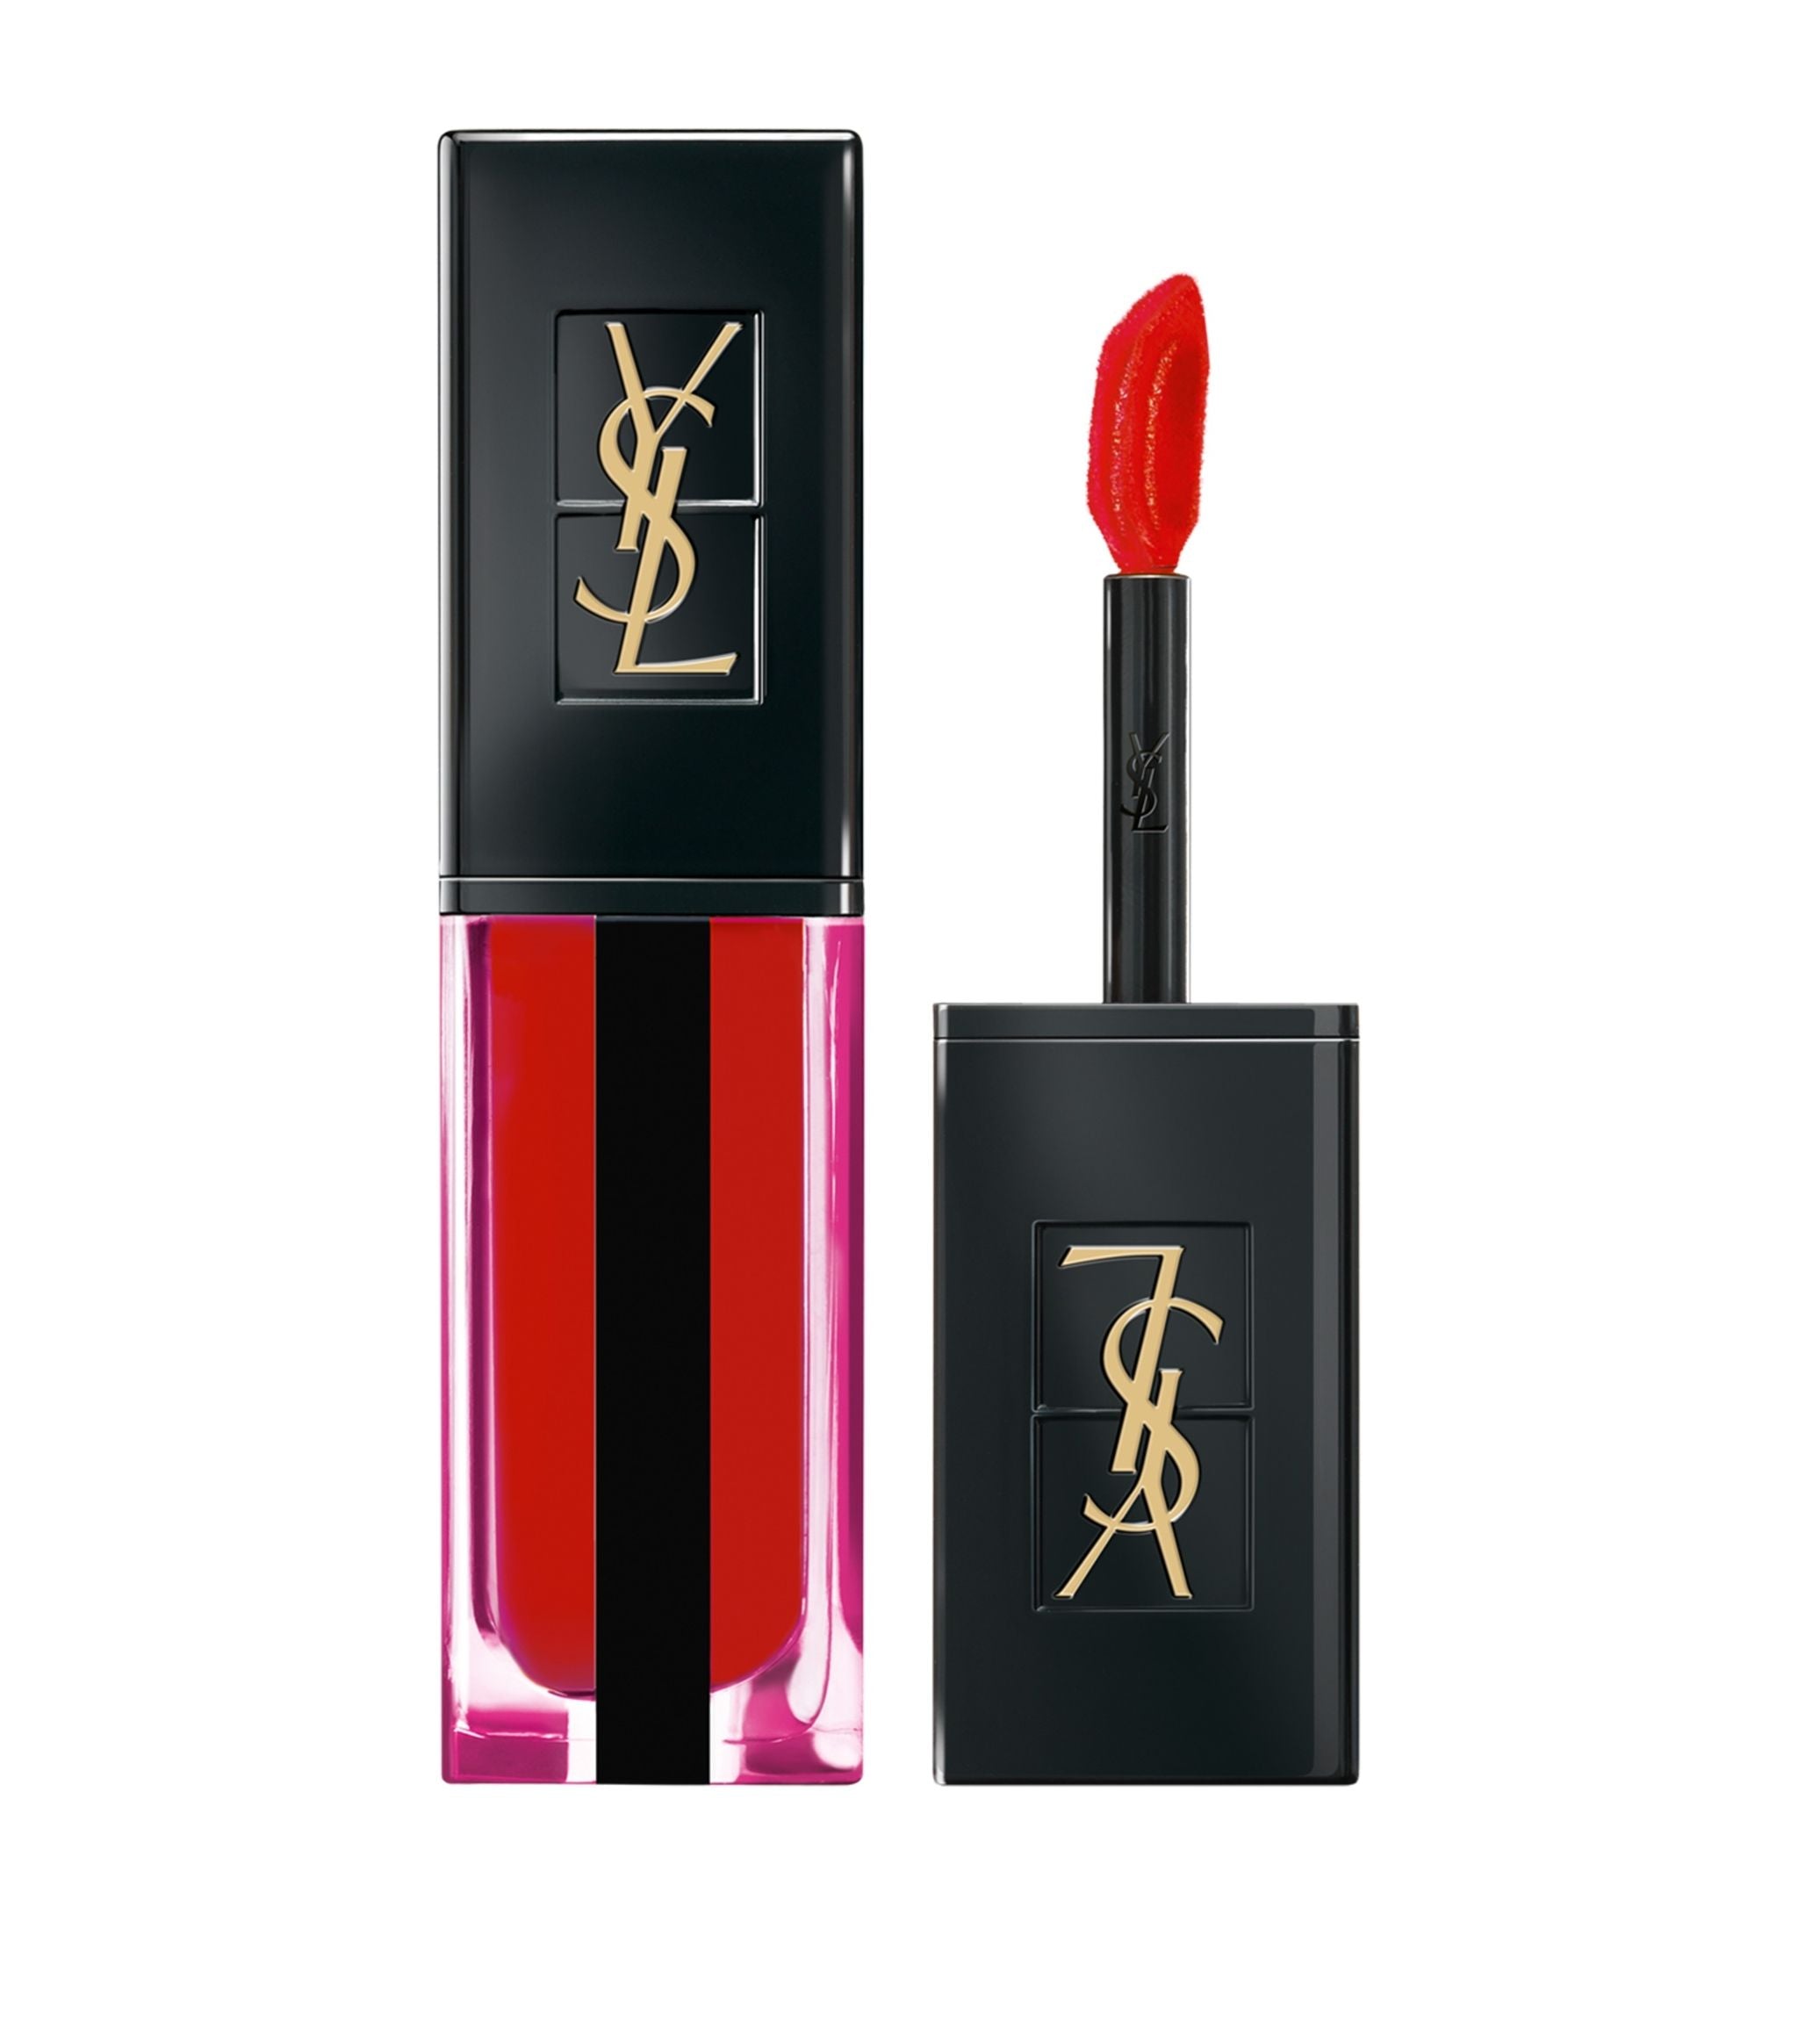 YSL VERNIS A LEVRES WATER STAIN 612 19 Make Up & Beauty Accessories Harrods   